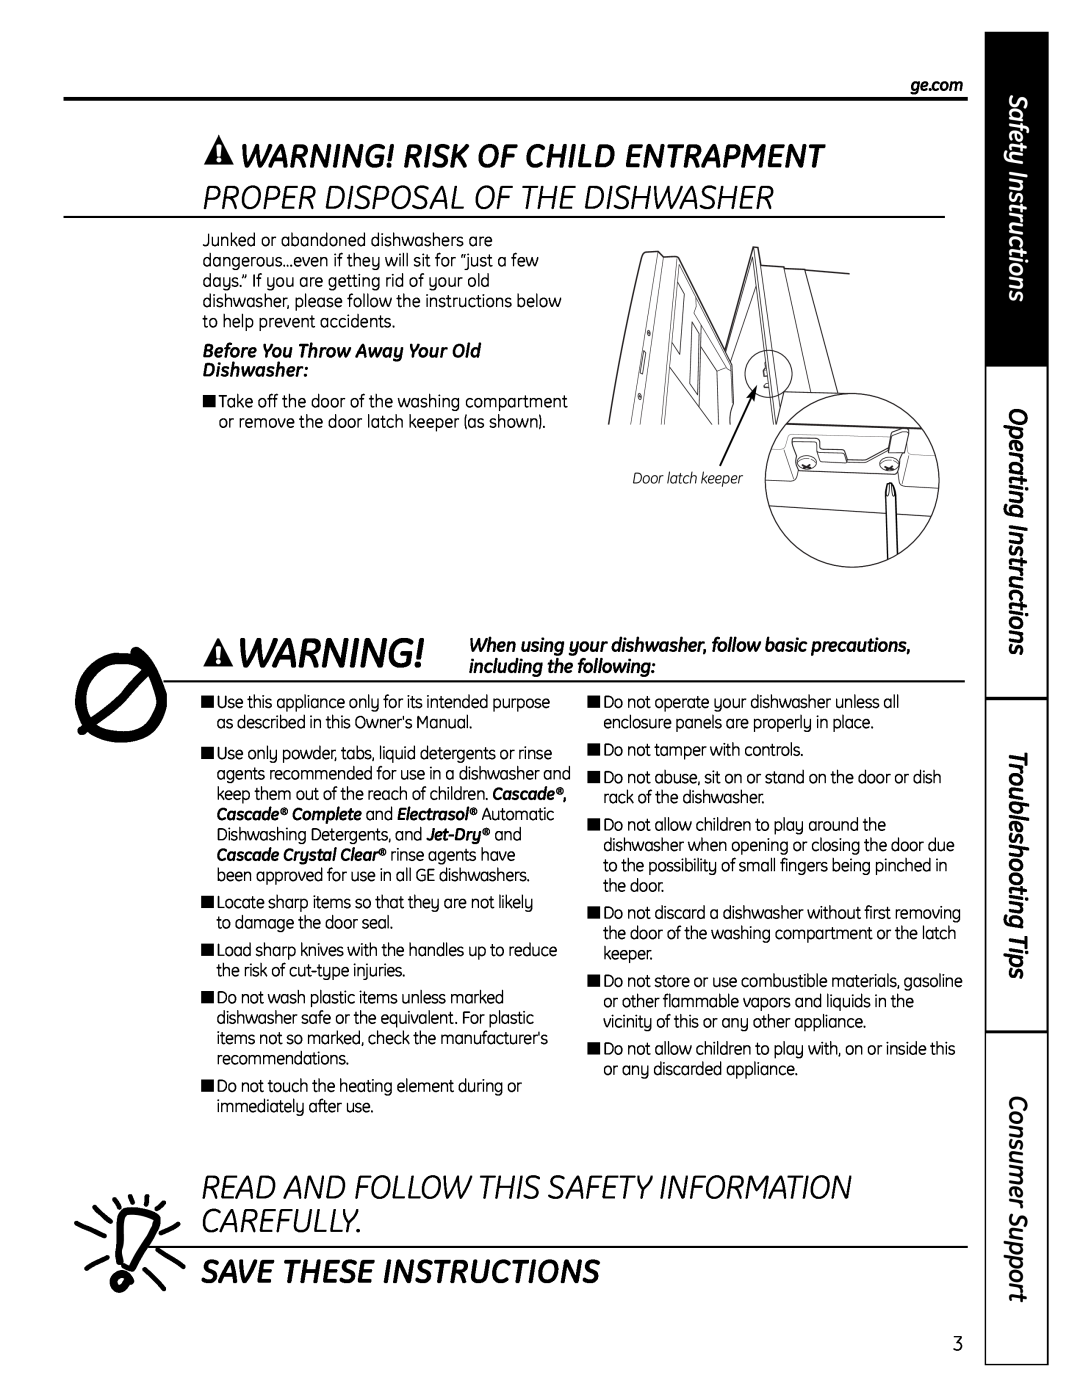 Mabe Canada HDA3000 Warning! Risk Of Child Entrapment, Proper Disposal Of The Dishwasher, Support, Save These Instructions 